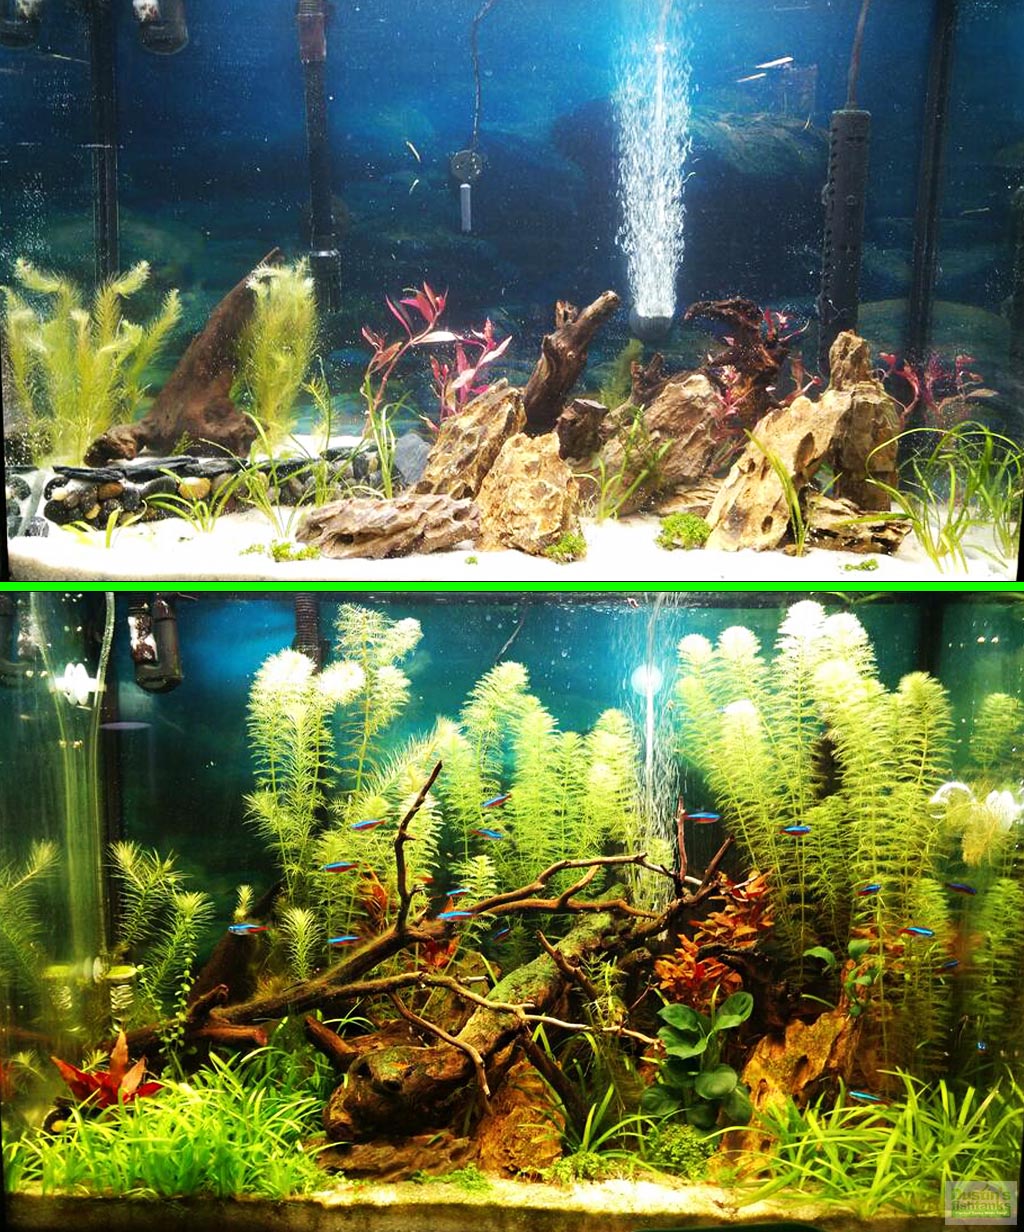 Source Planted substrate sand water grass mud fish tank